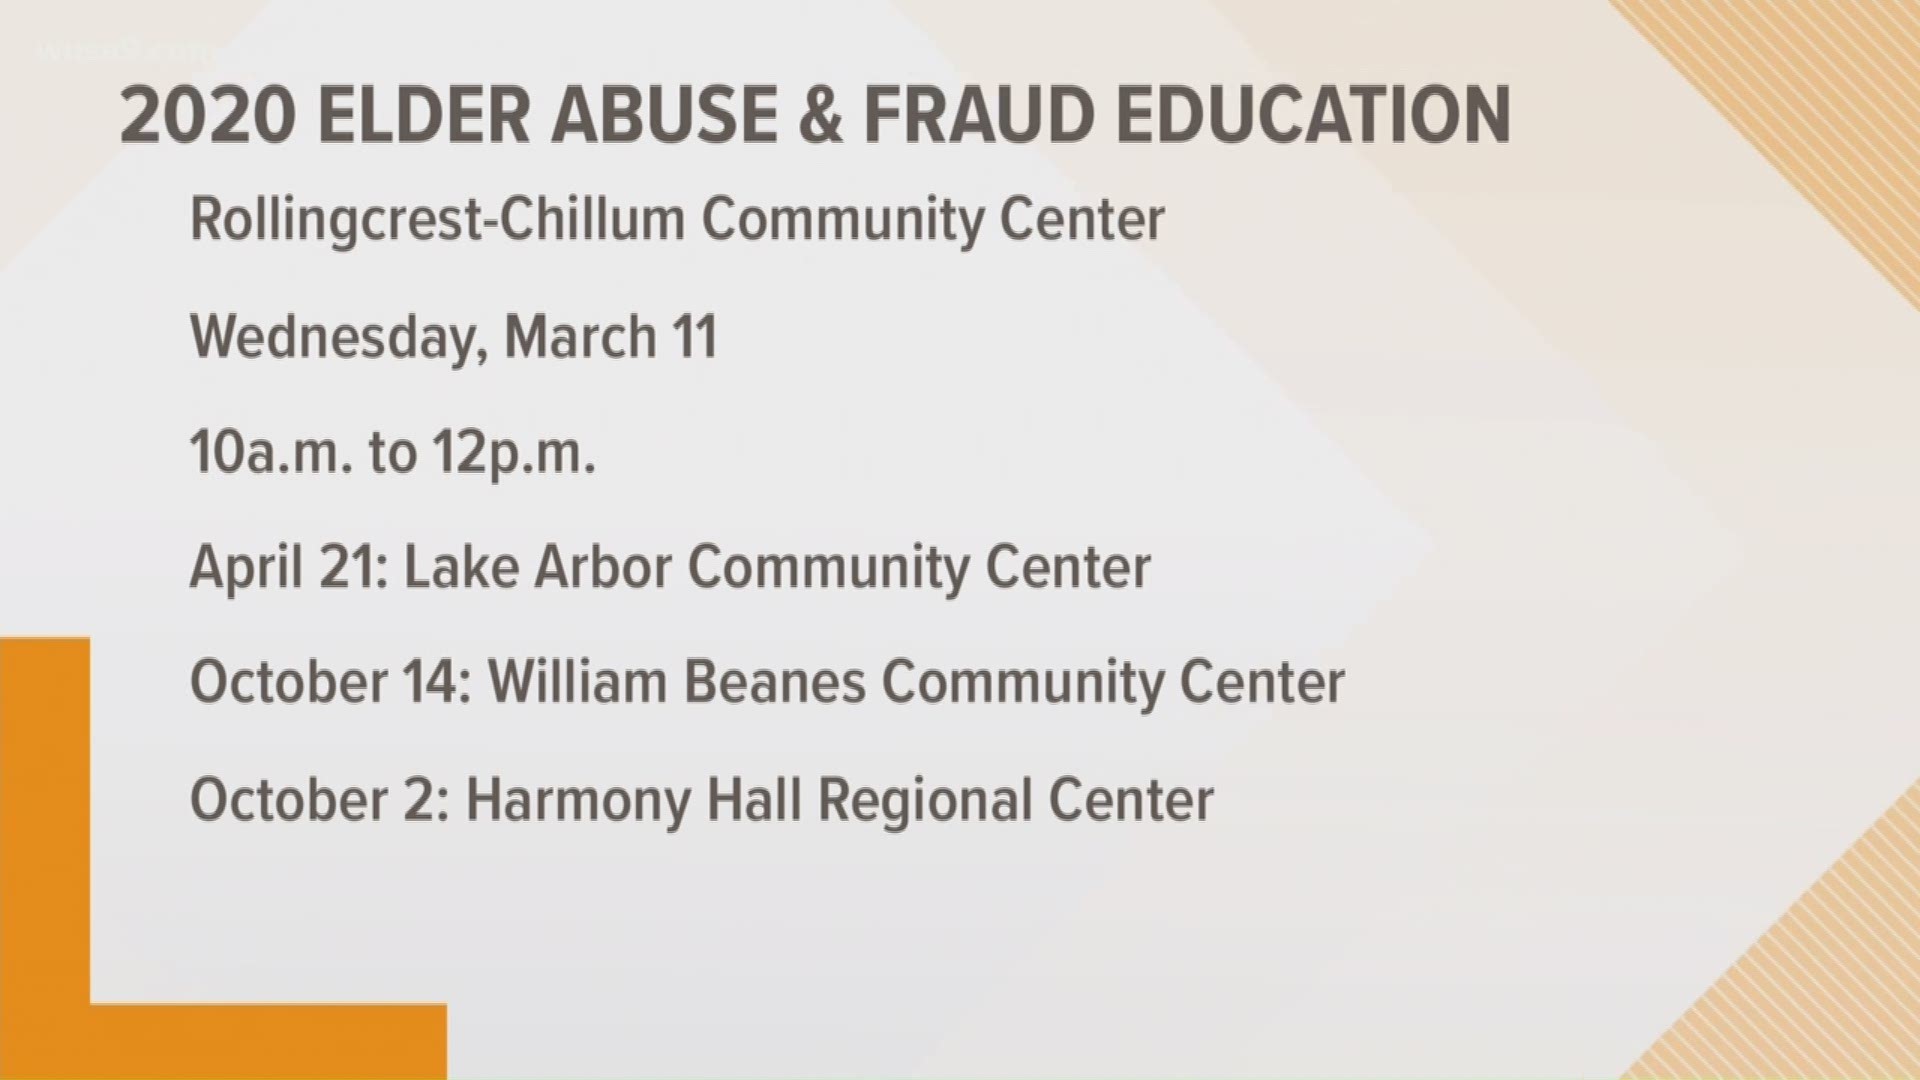 The 2020 Elder Abuse and Fraud Education Training Series starts this week in Chillum.